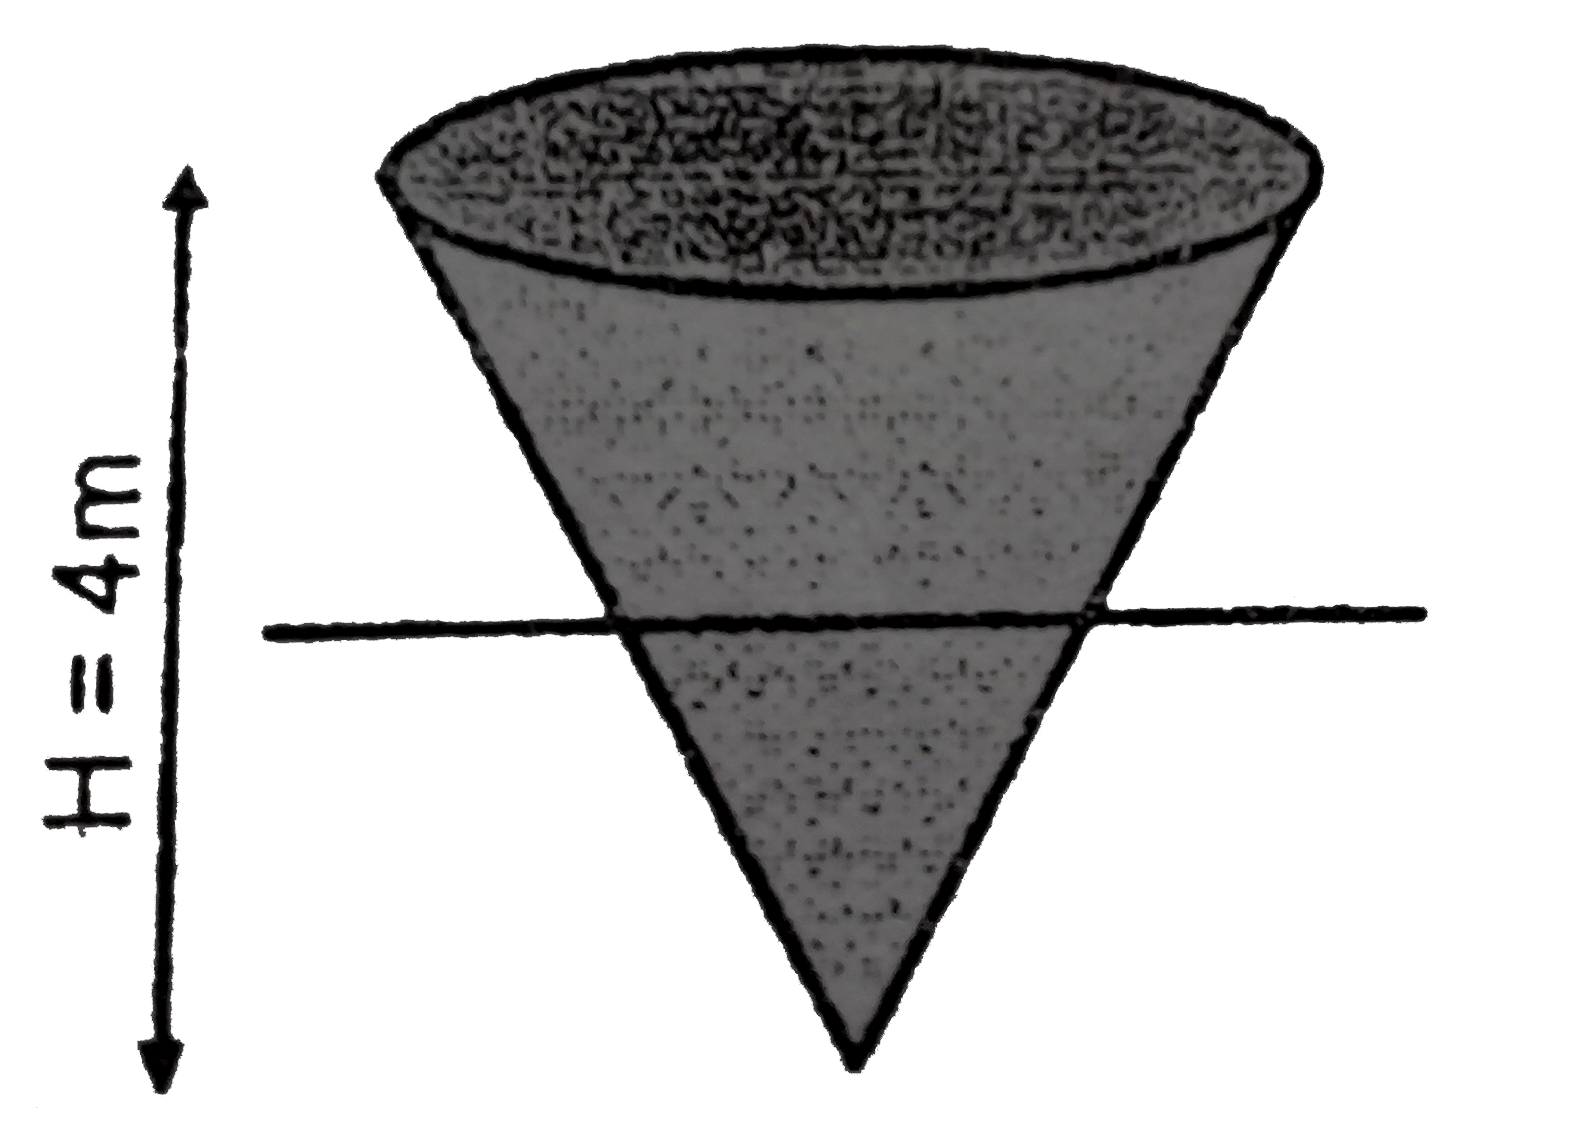 A cone made of a materal of relative density (d = (27)/(64)) and height 4 m floats with its apex downward in a big container having water. Calculate the submerged height (in meter) of cone in water.